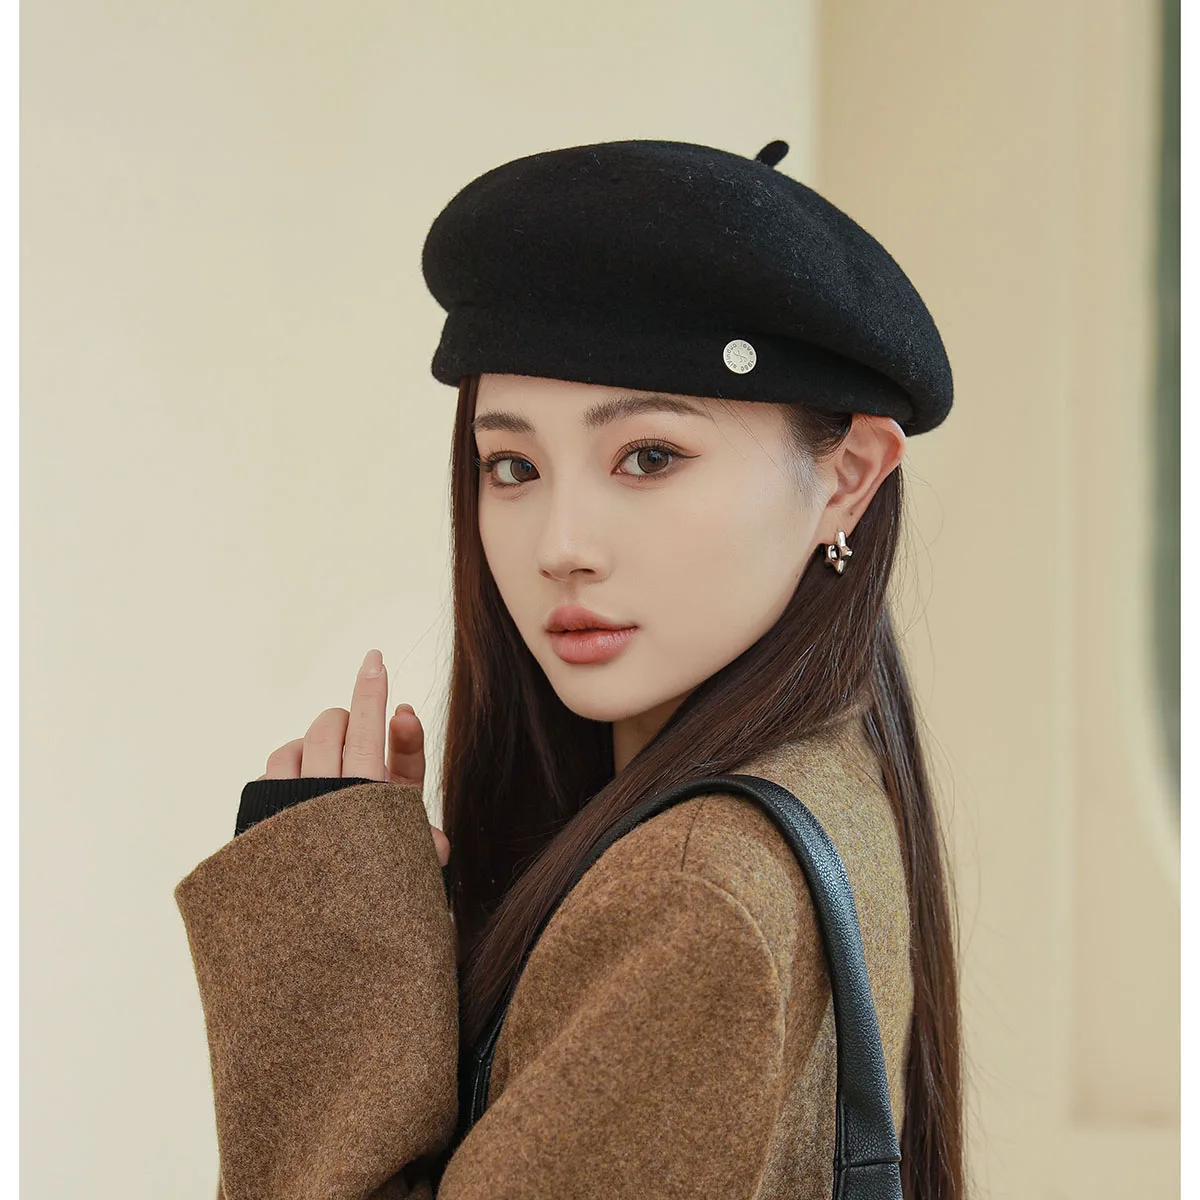 

Women Wool Blend Beret Hat Solid Color French Beret Hat Artist Berets Cap for Women Girls Indoor Outdoor Winter Fashion Lady Hat